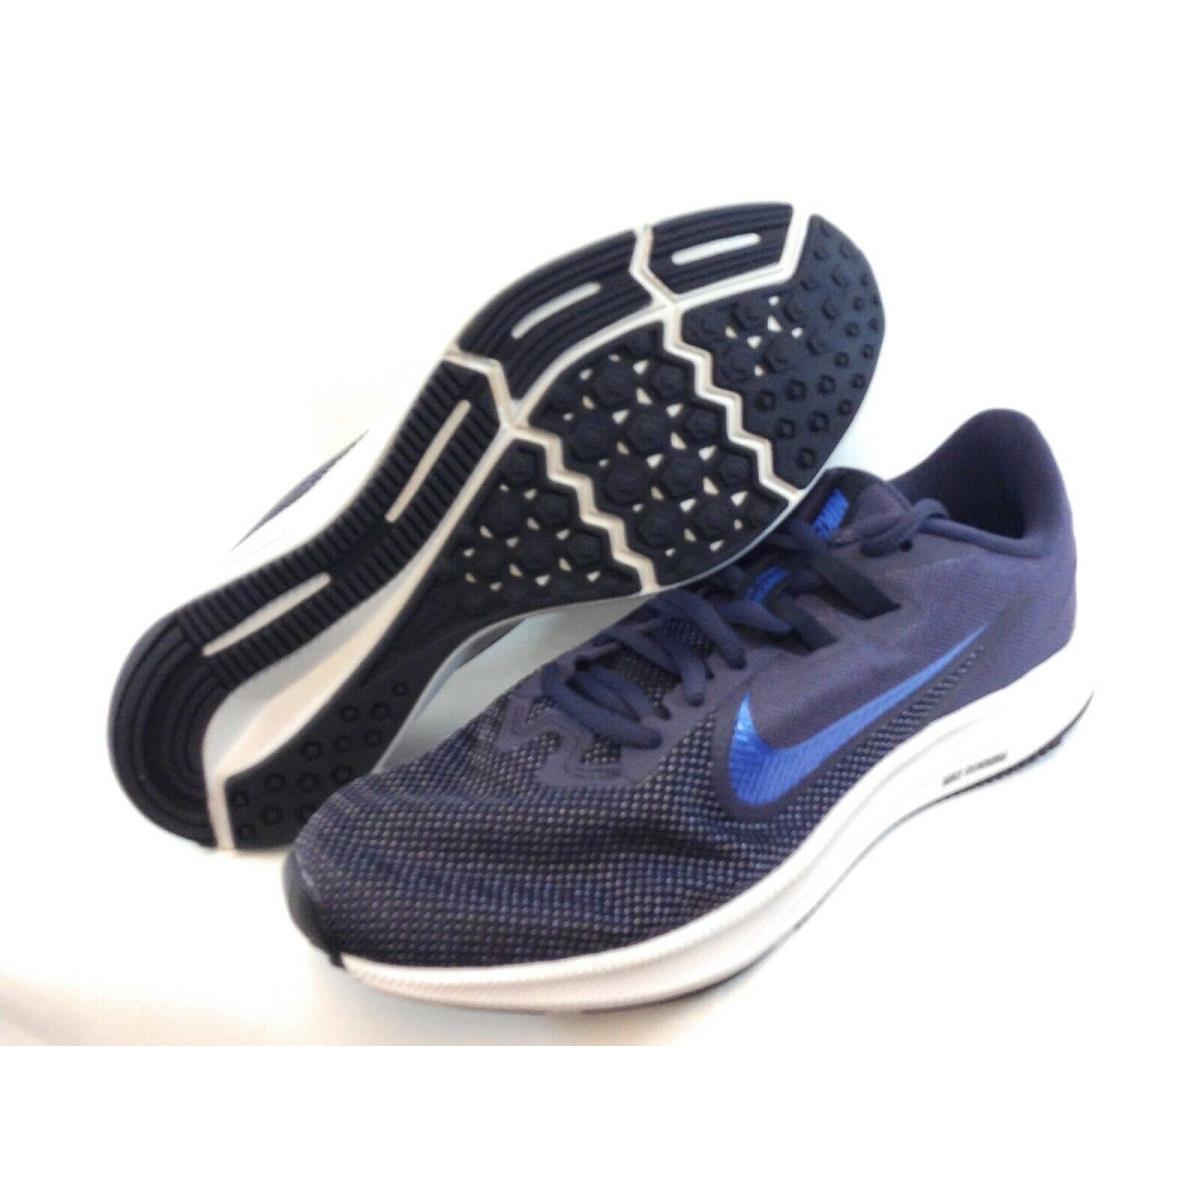 Mens Nike Downshifter 9 AQ7481 011 Navy Blue White Sneakers Shoes - Blue, Manufacturer: Gridiron Blue